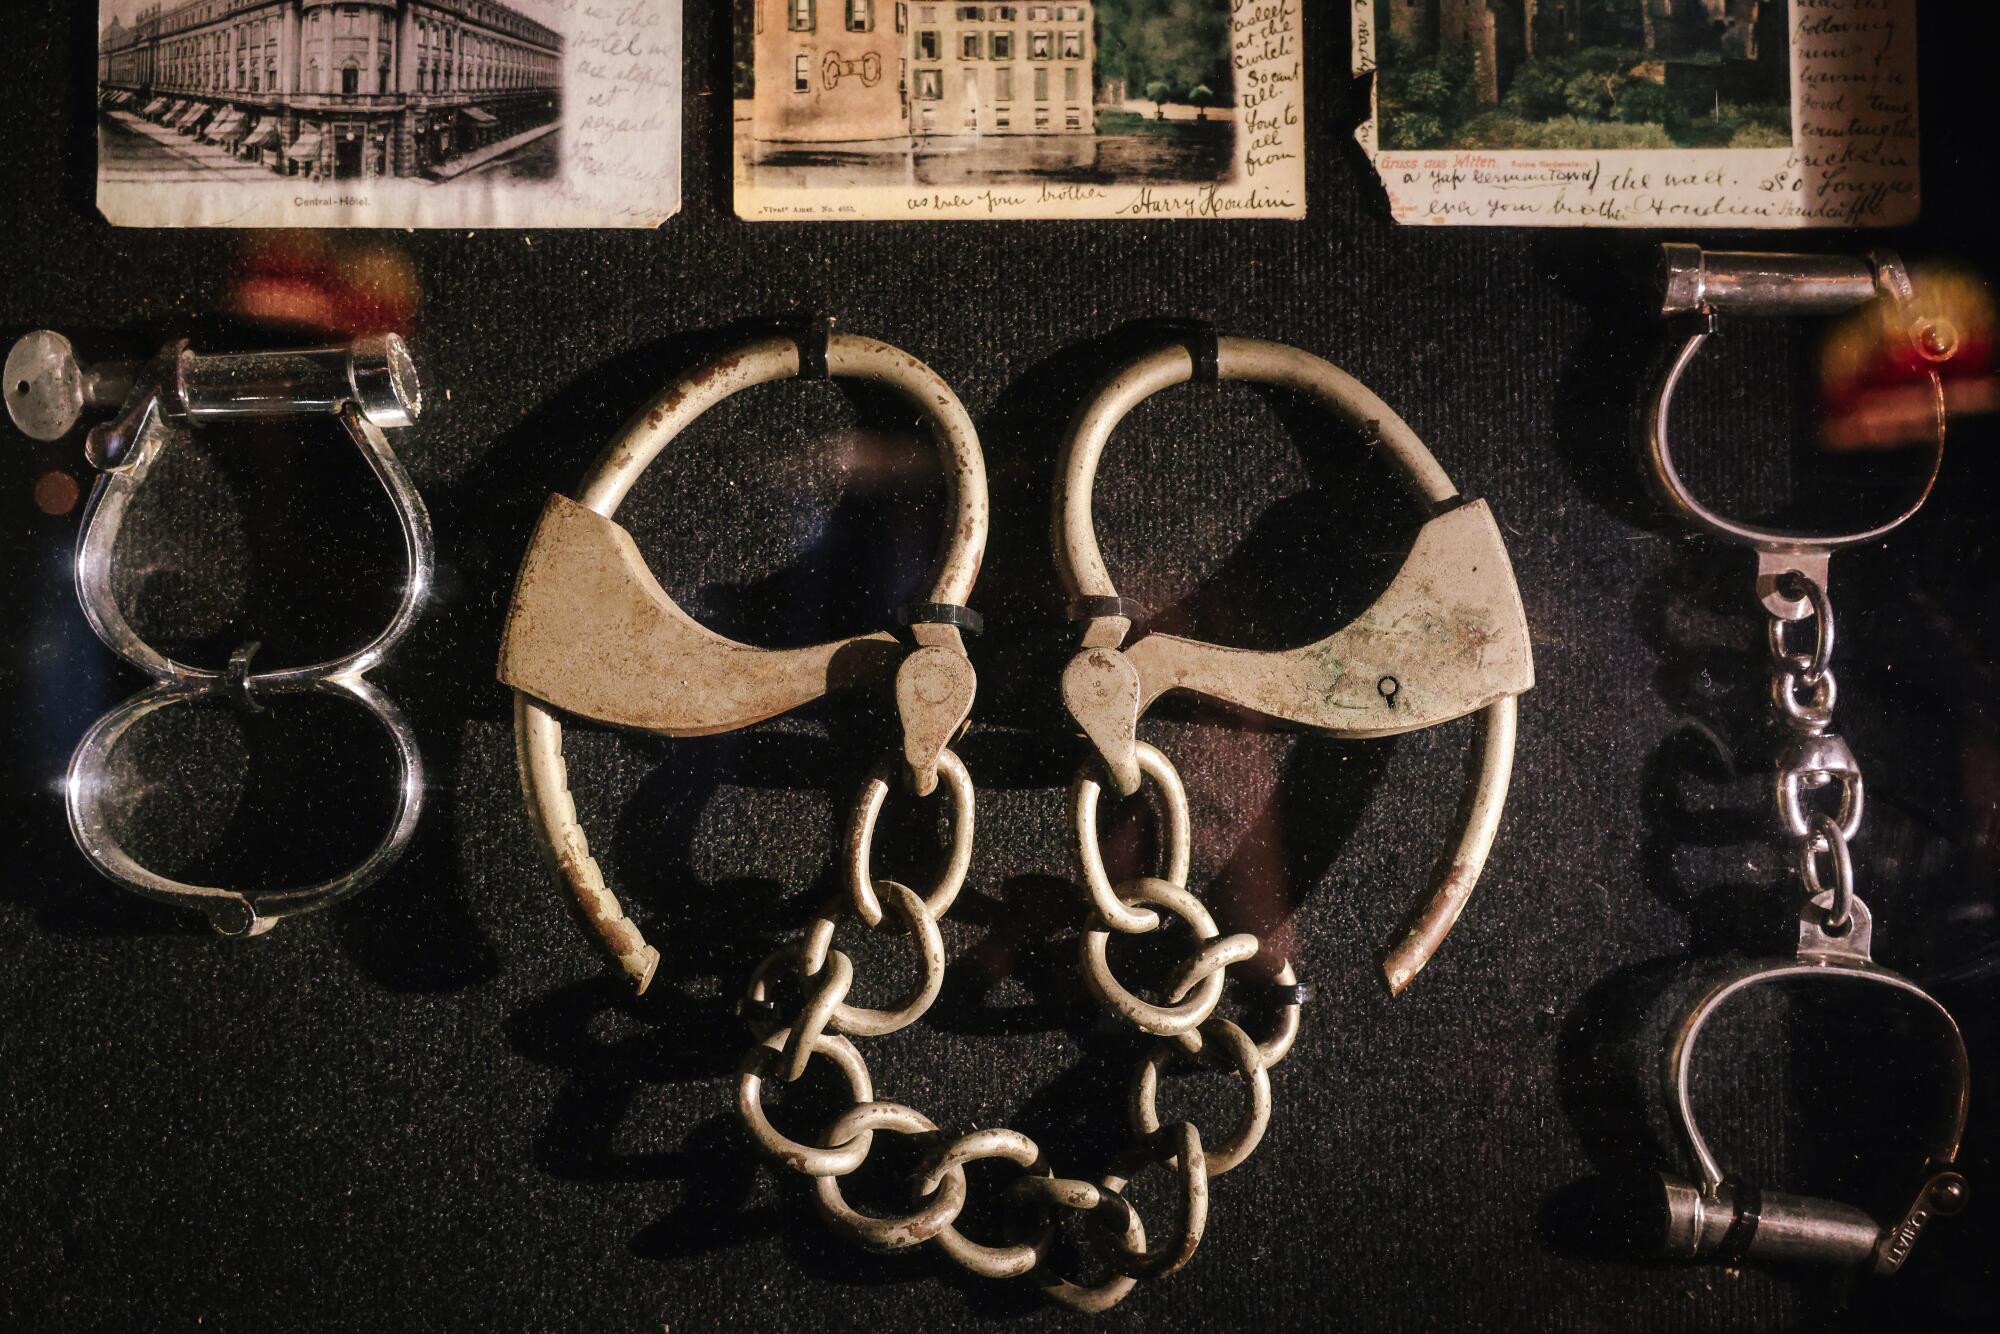 Handcuffs used by Harry Houdini hang inside one of the private dining rooms at the Magic Castle.